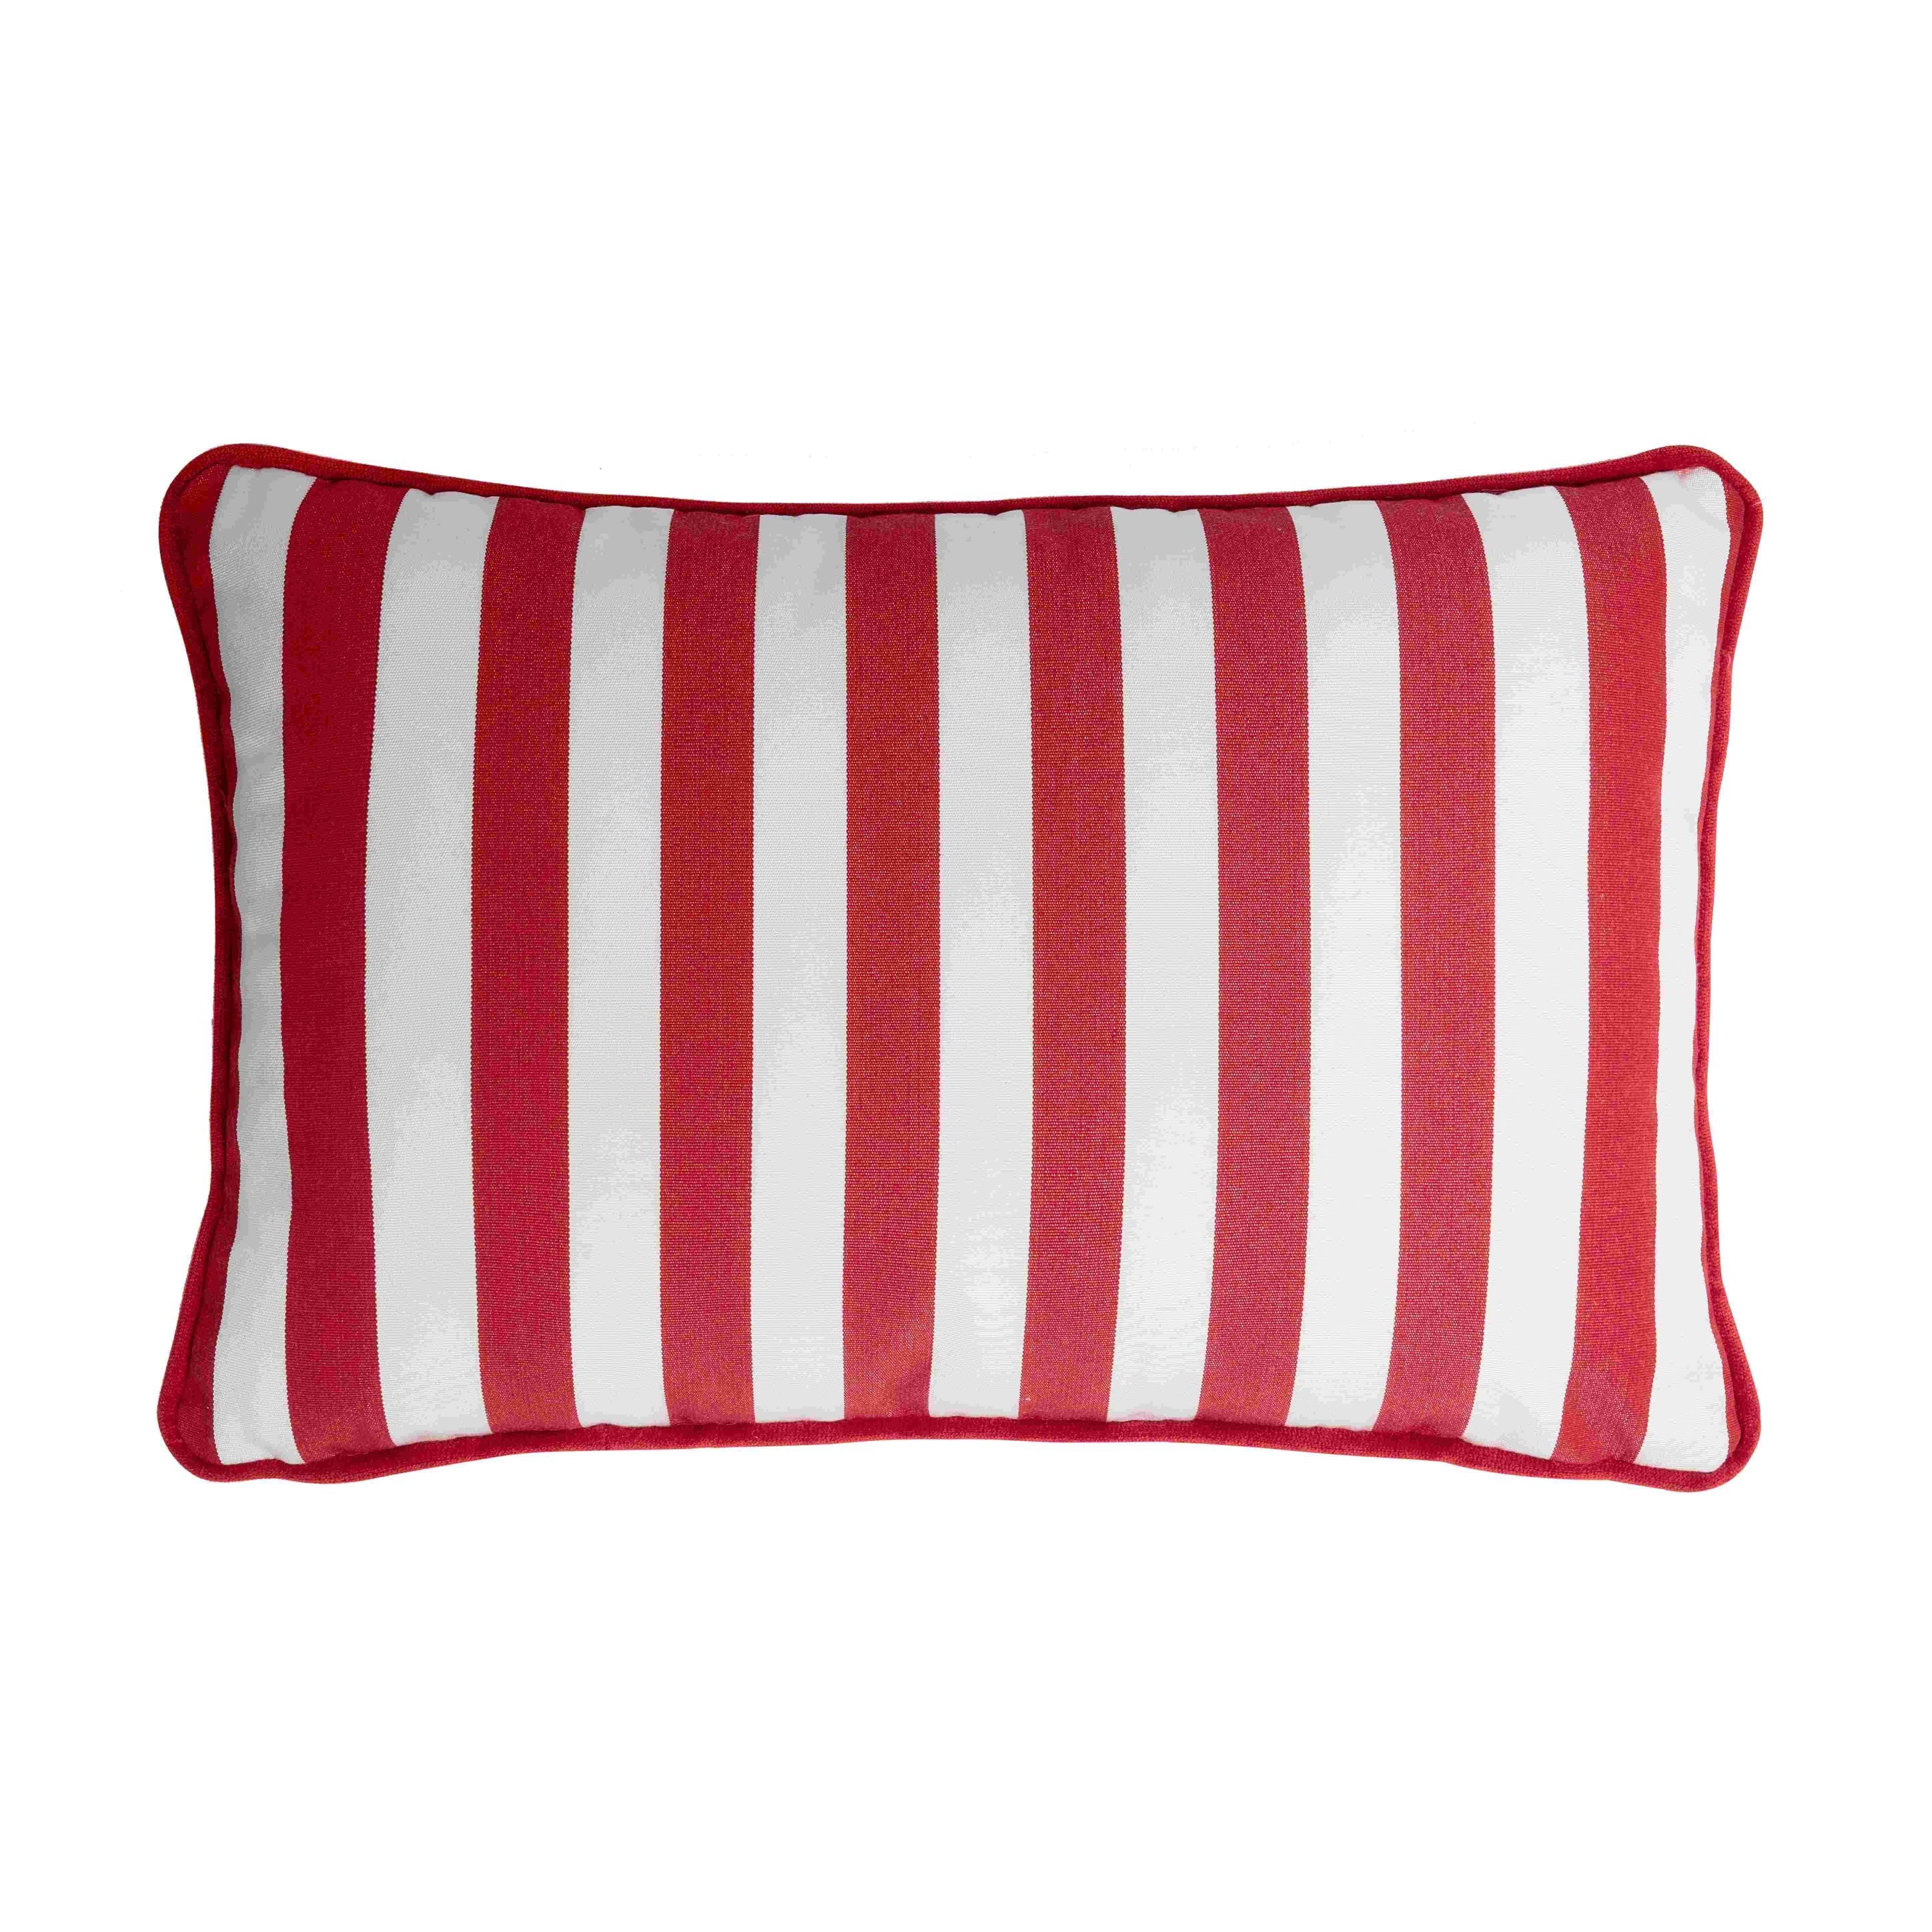 Lo Decor Red Striped Happy Pillow - Indoor/Outdoor with Piping